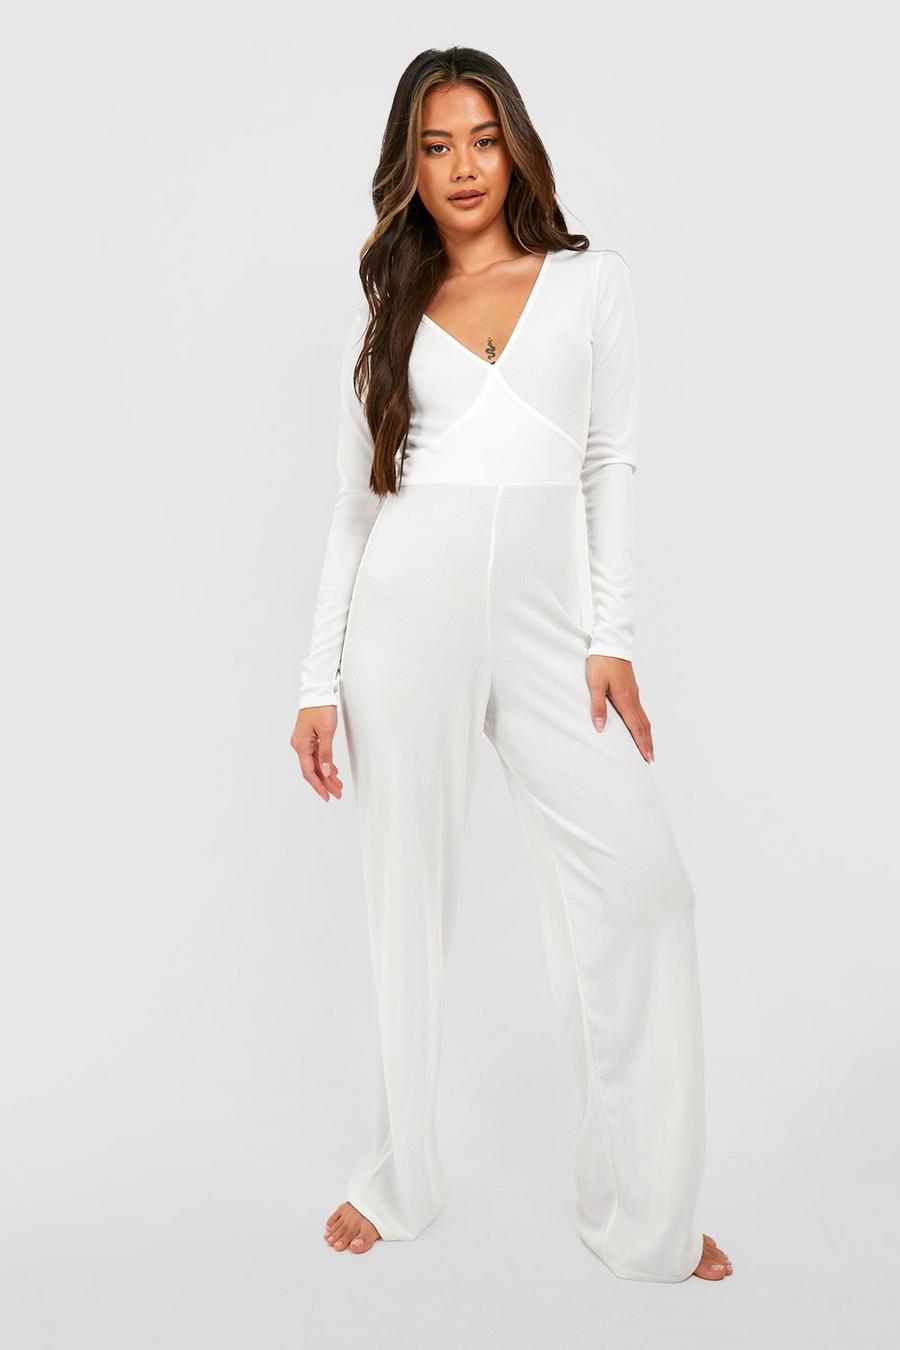 As It Was Cross Front Jumpsuit - Taupe